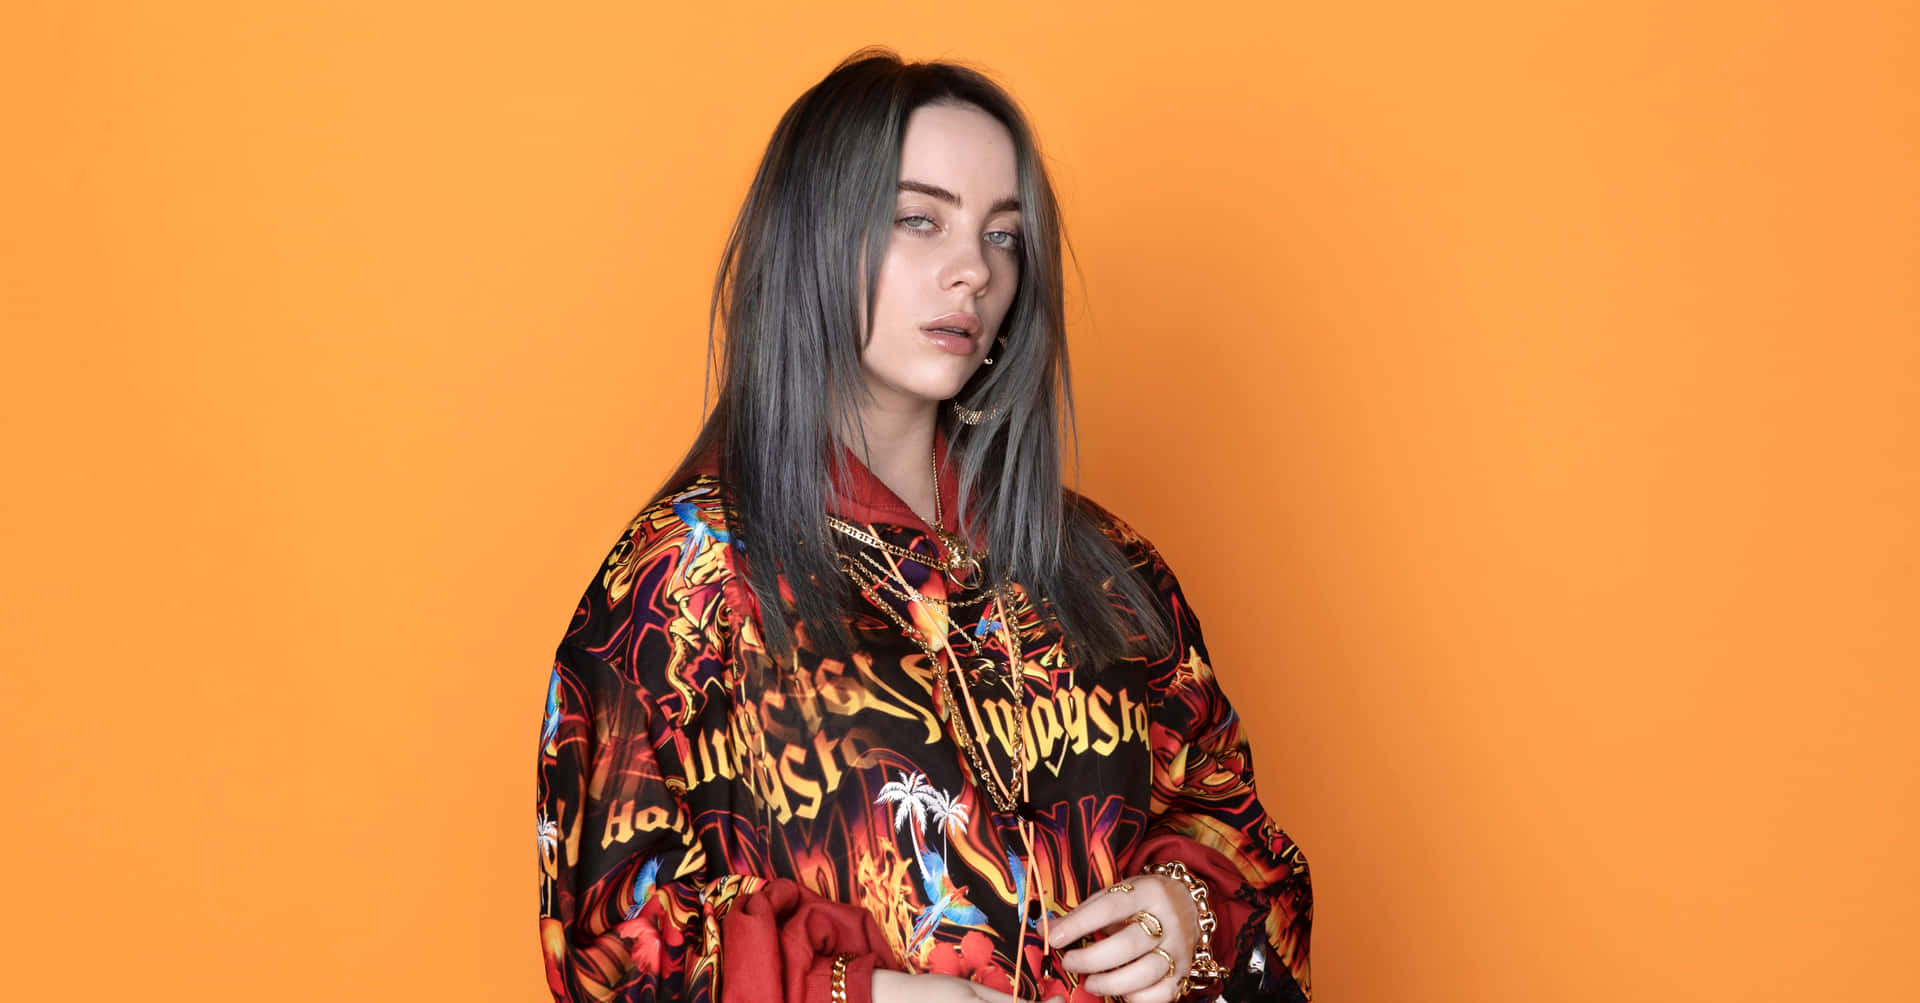 "Billie Eilish on the go with her laptop" Wallpaper